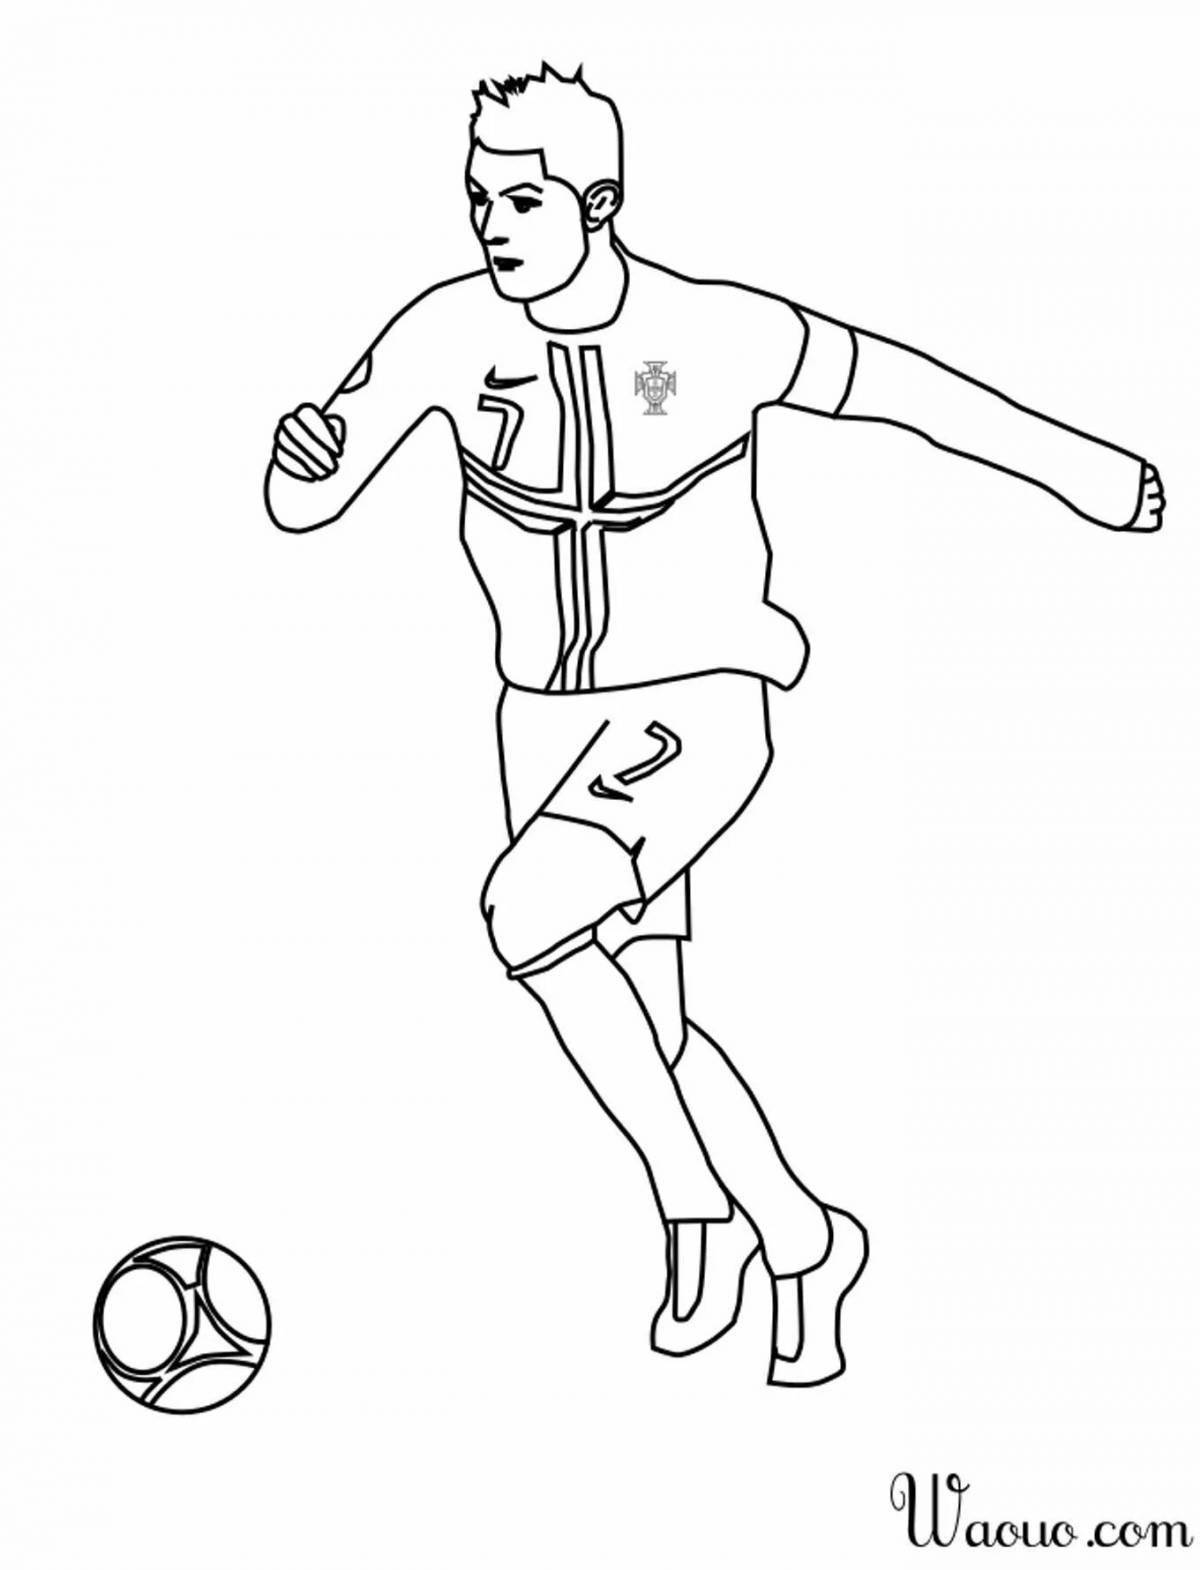 Coloring page confident football player ronaldo